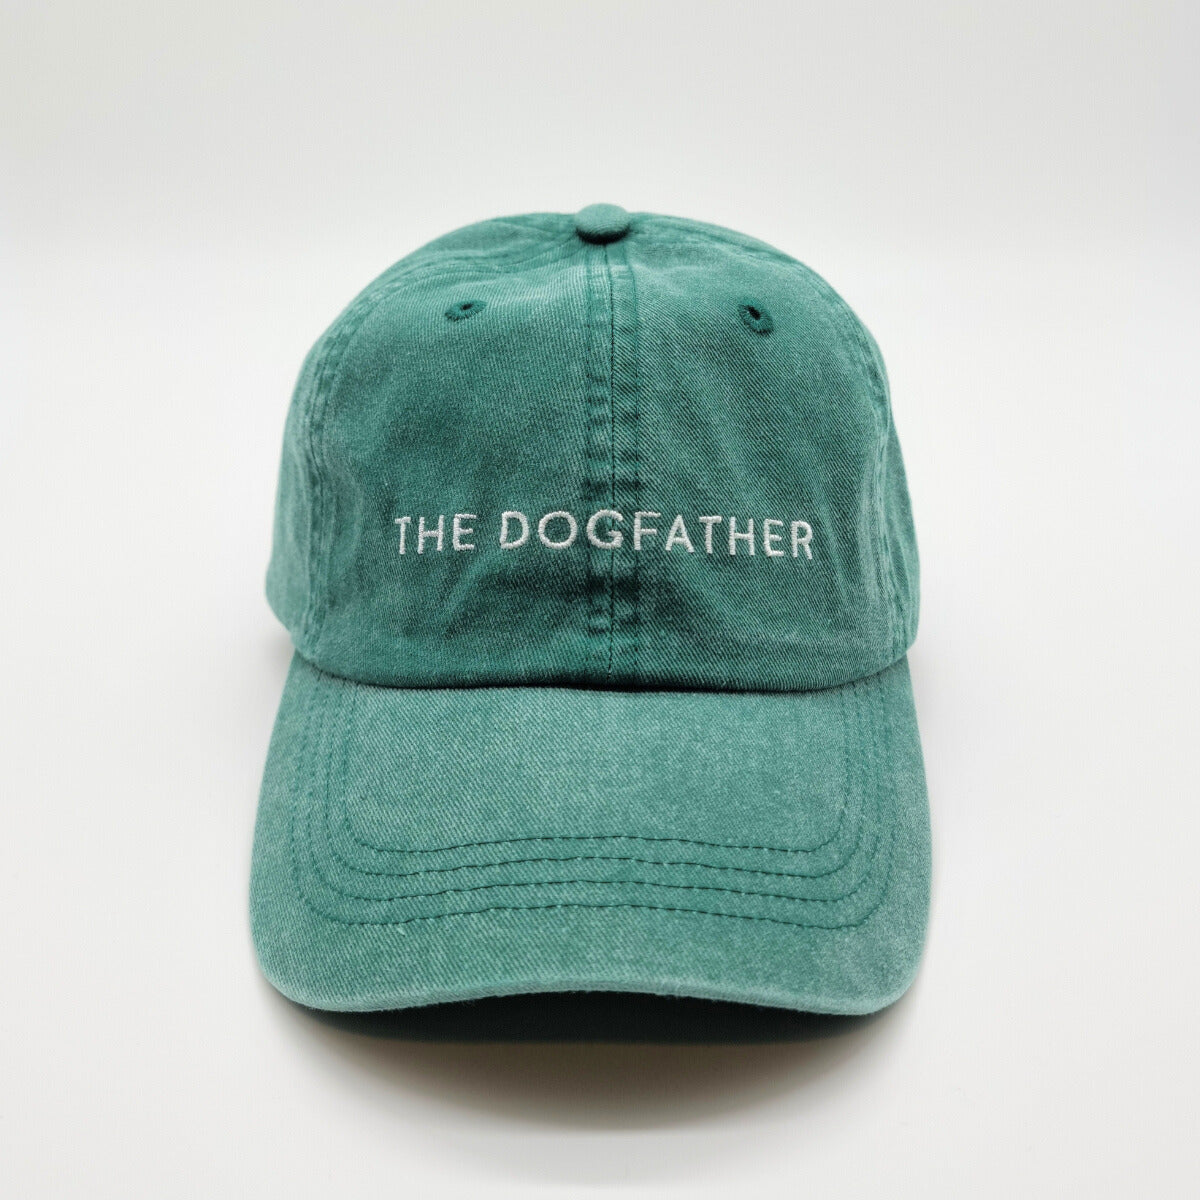 green-denim-cap-the-dogfather-front.jpg